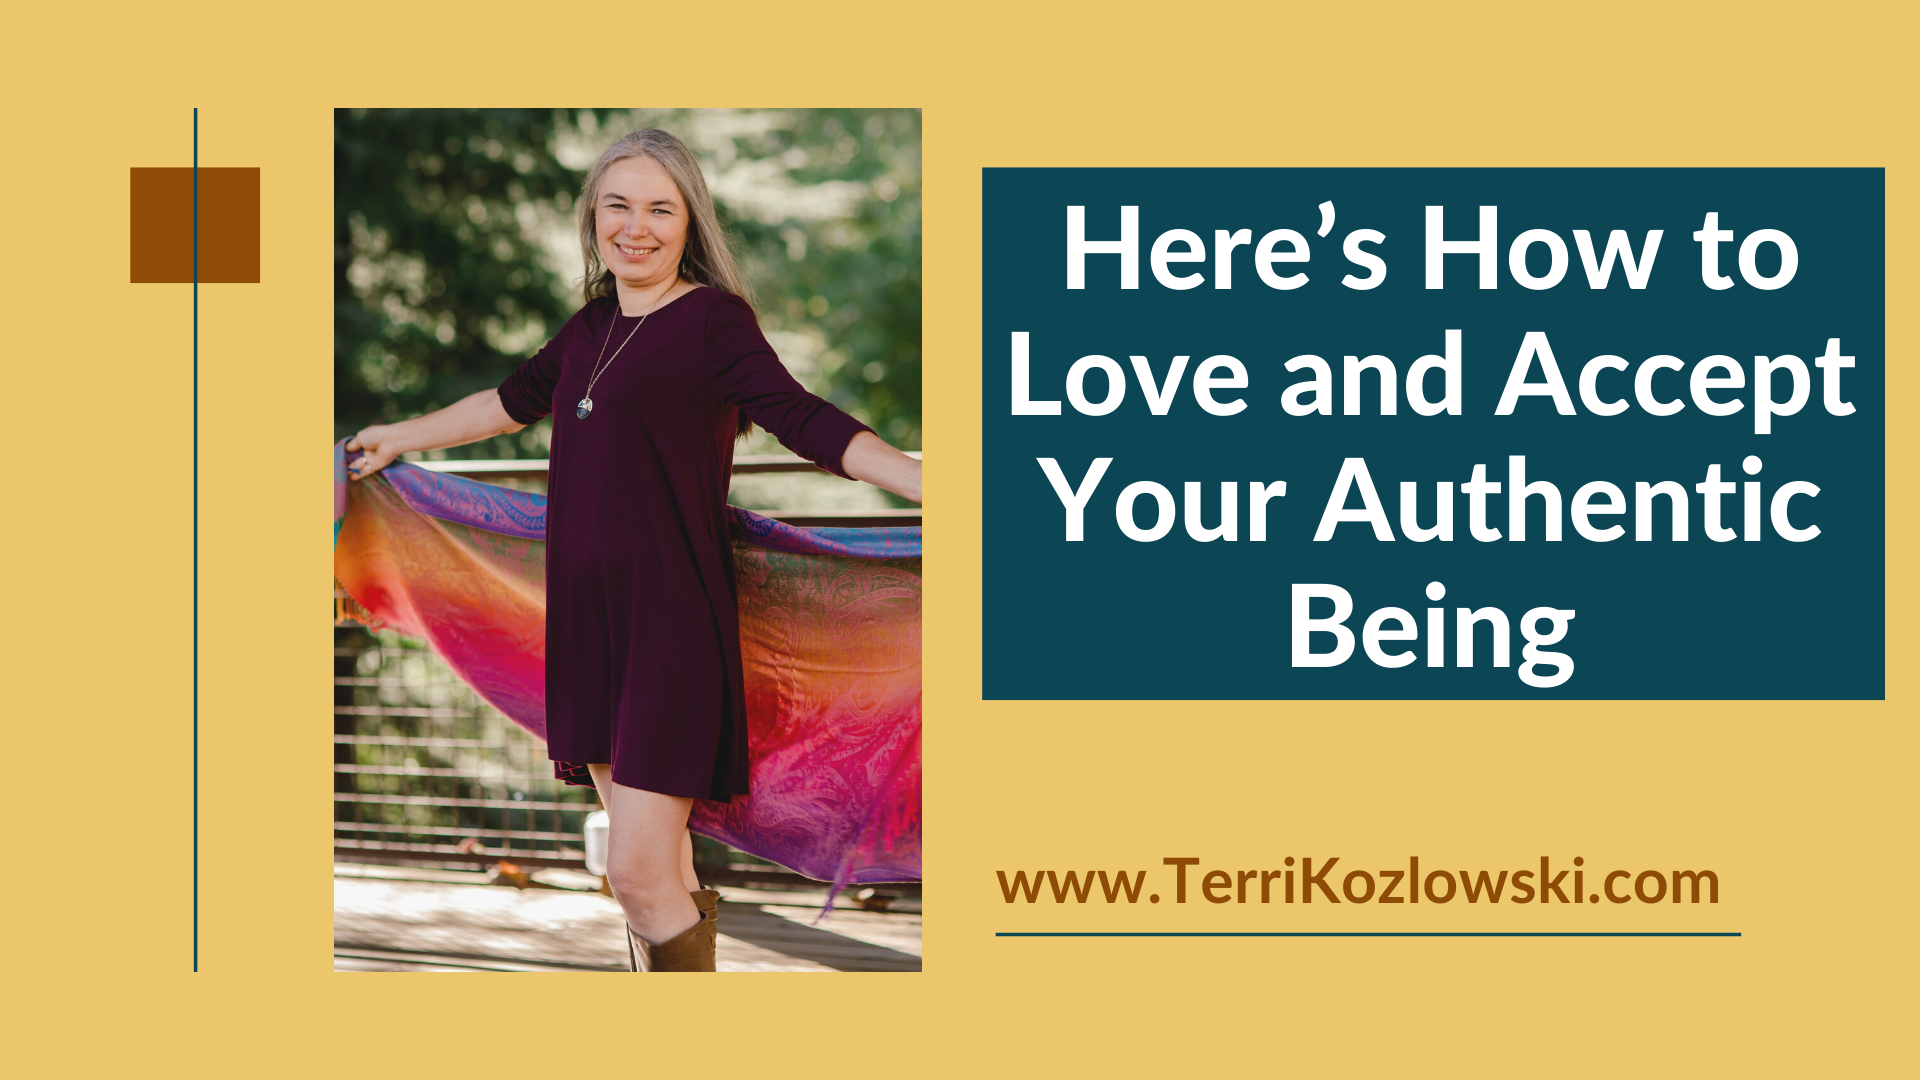 Authentic Self-Acceptance is Love